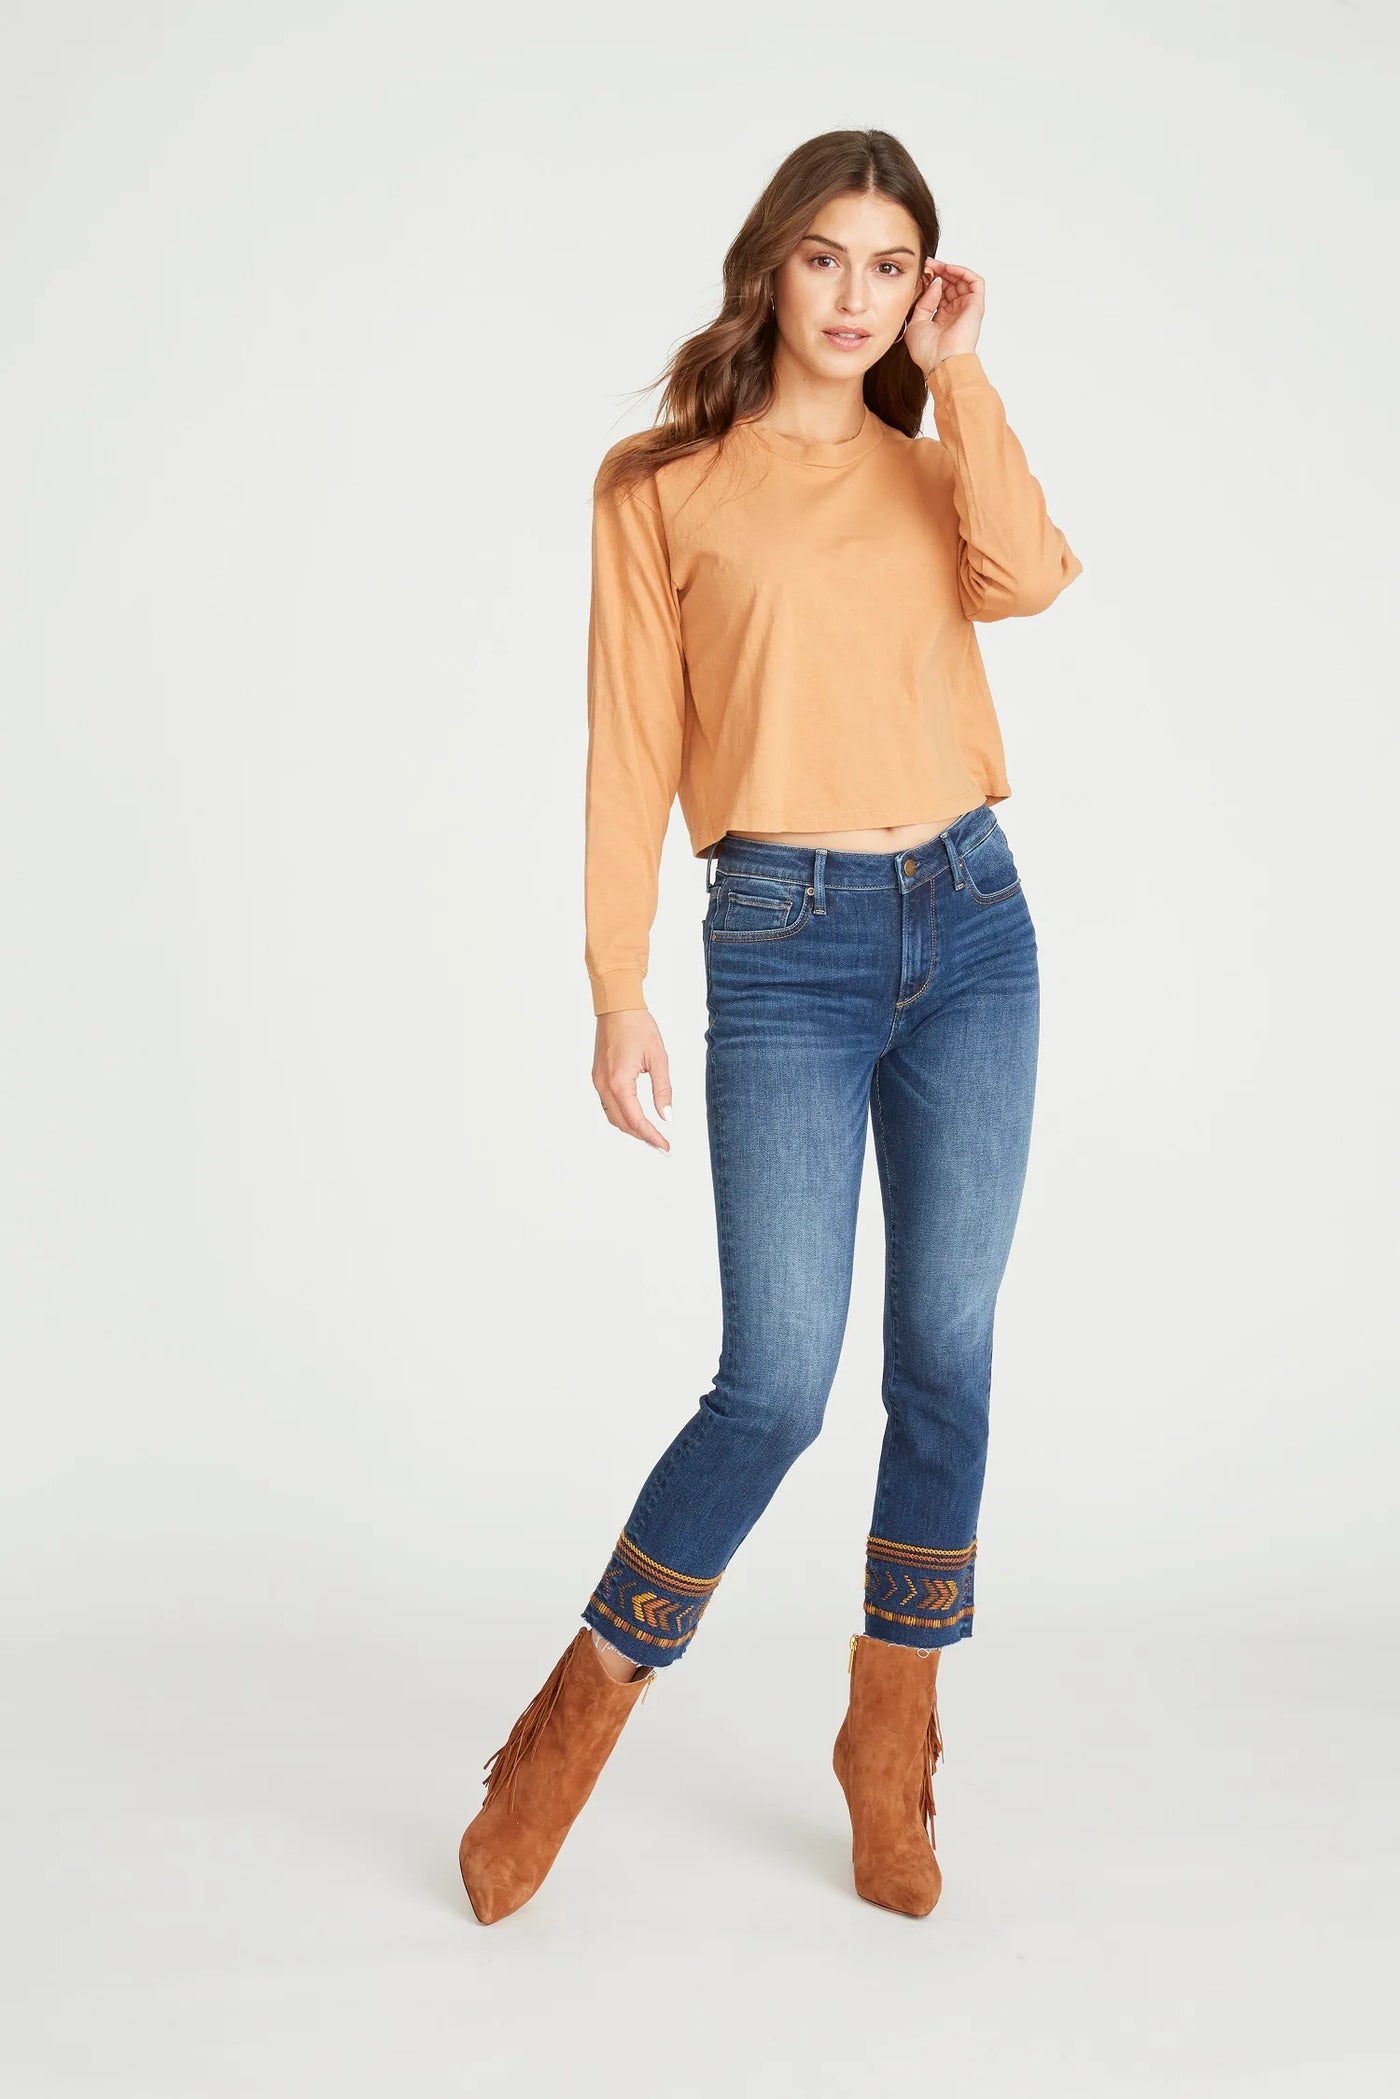 Colette Cropped Jeans